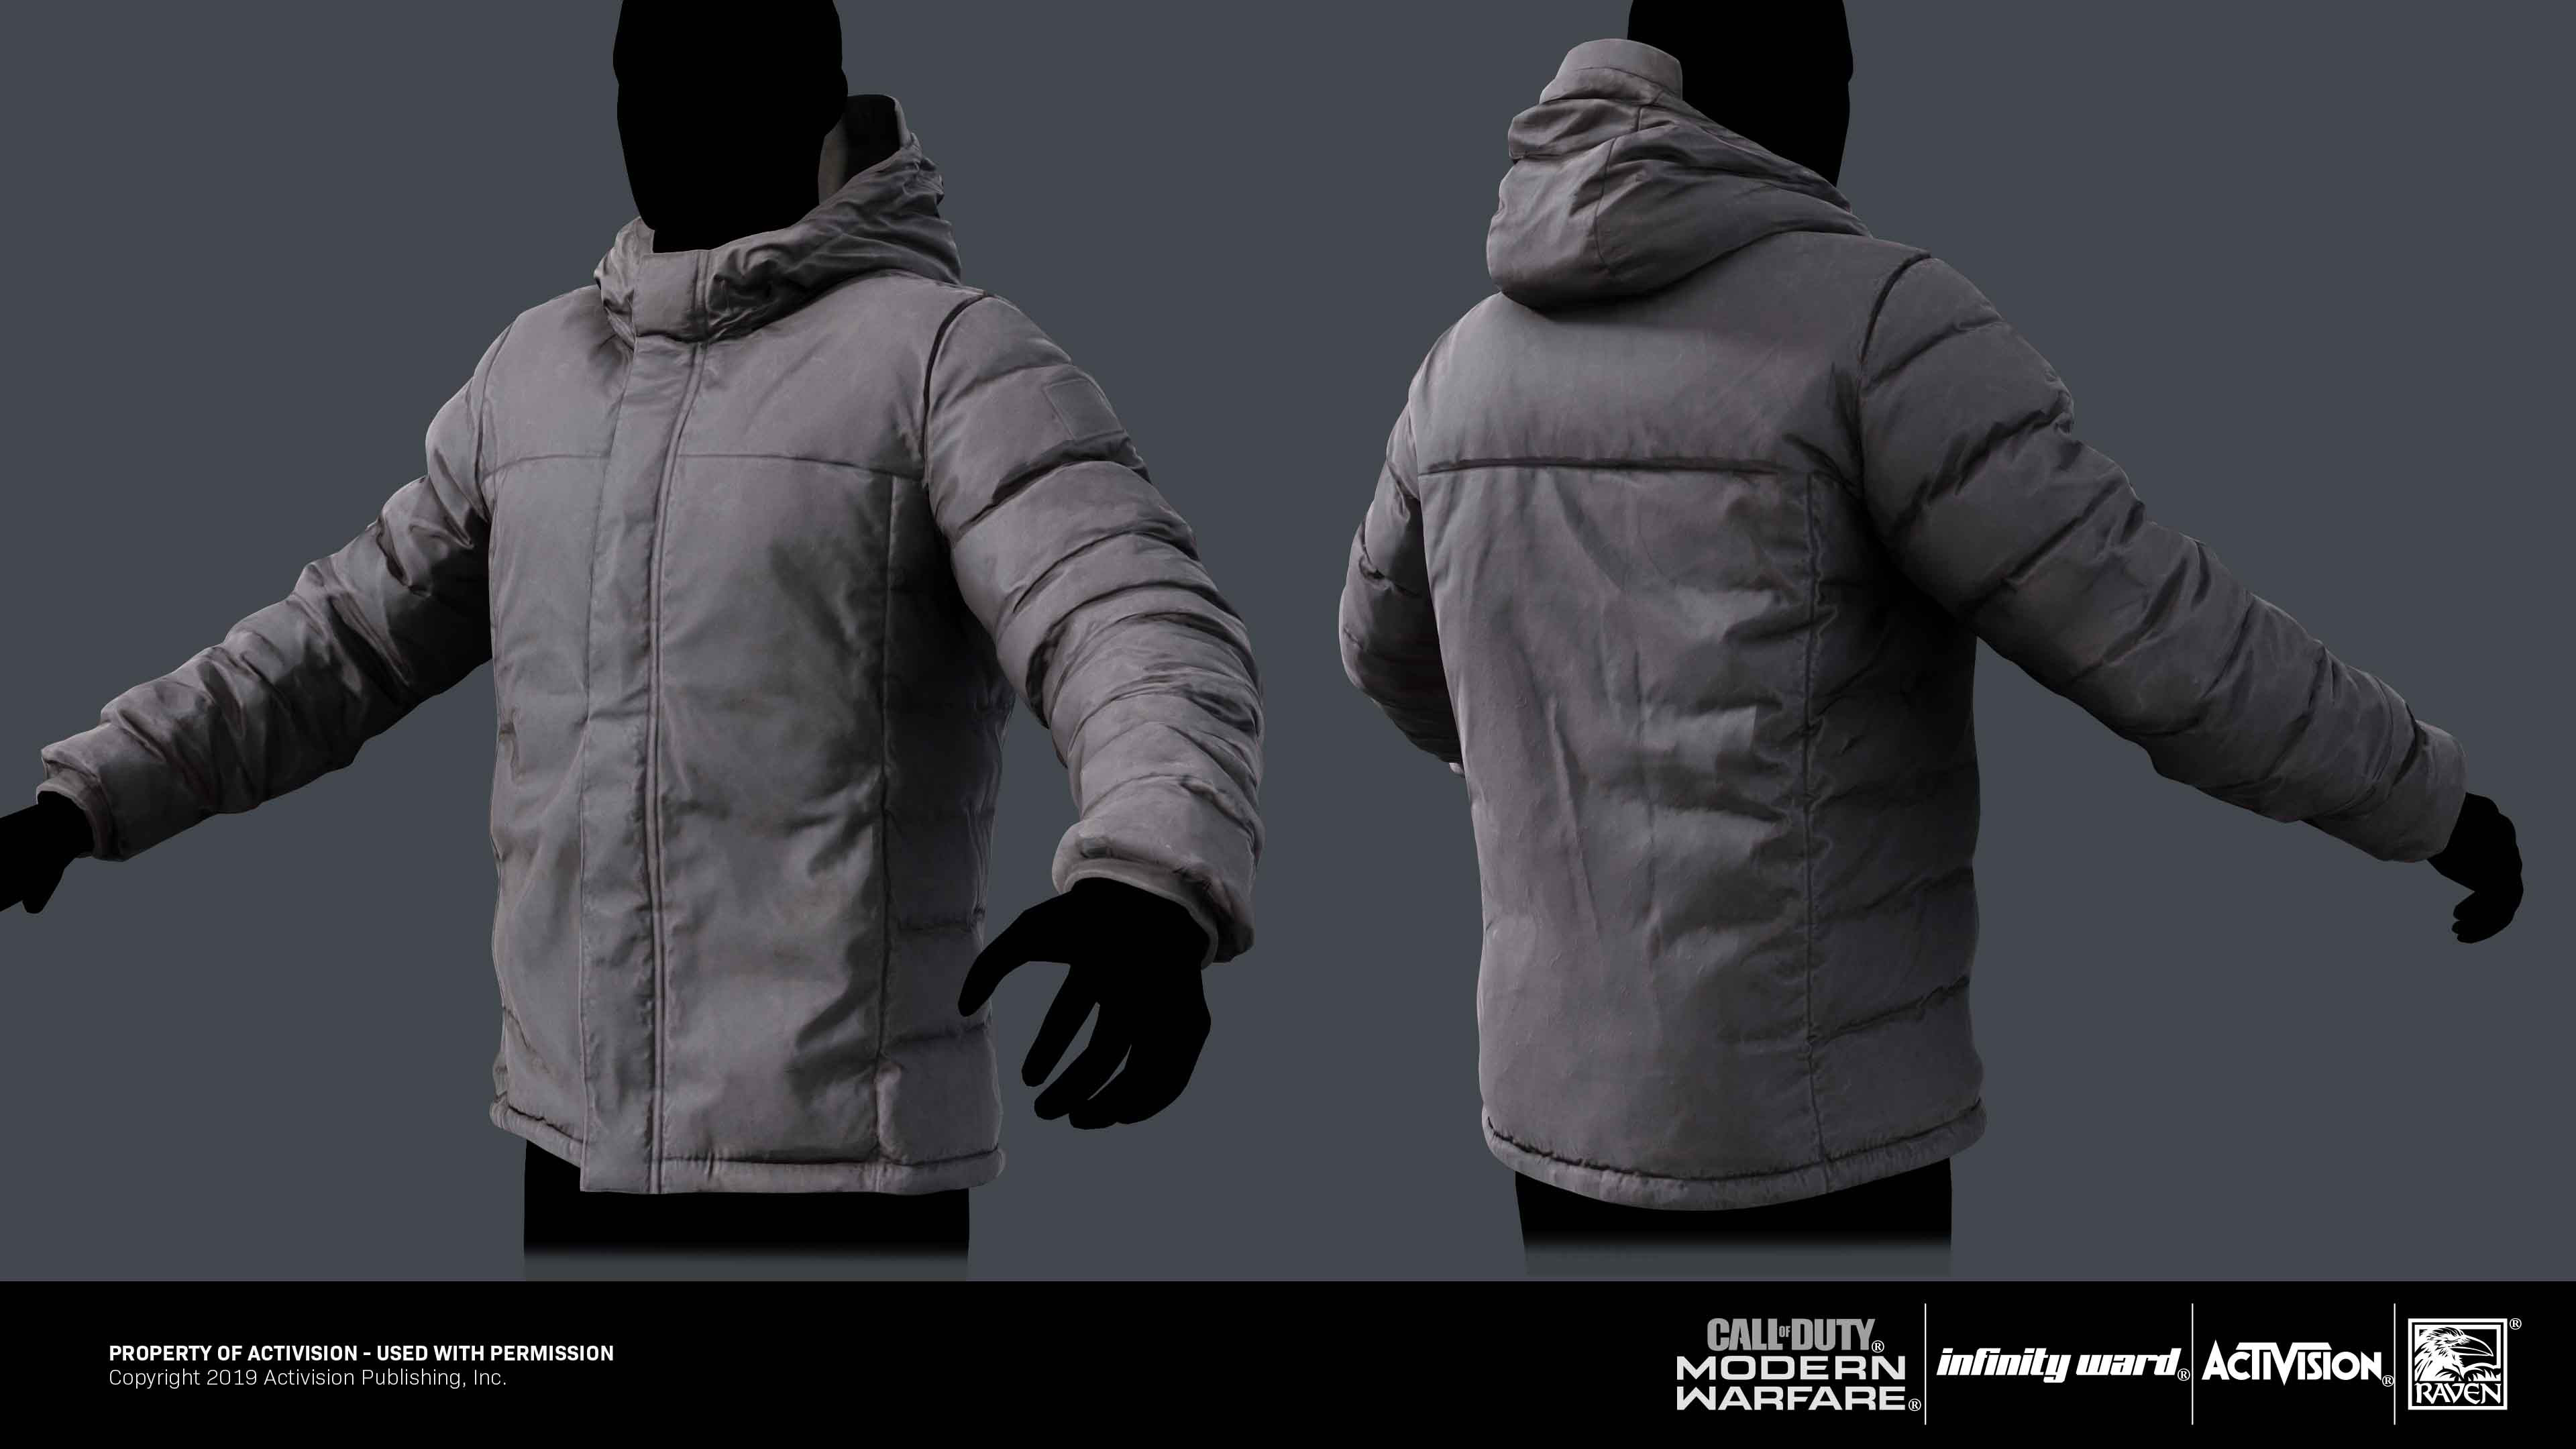 Jacket clothes: Highpoly/ scan cleanup, lowpoly, bakes and textures/ cleanup. 